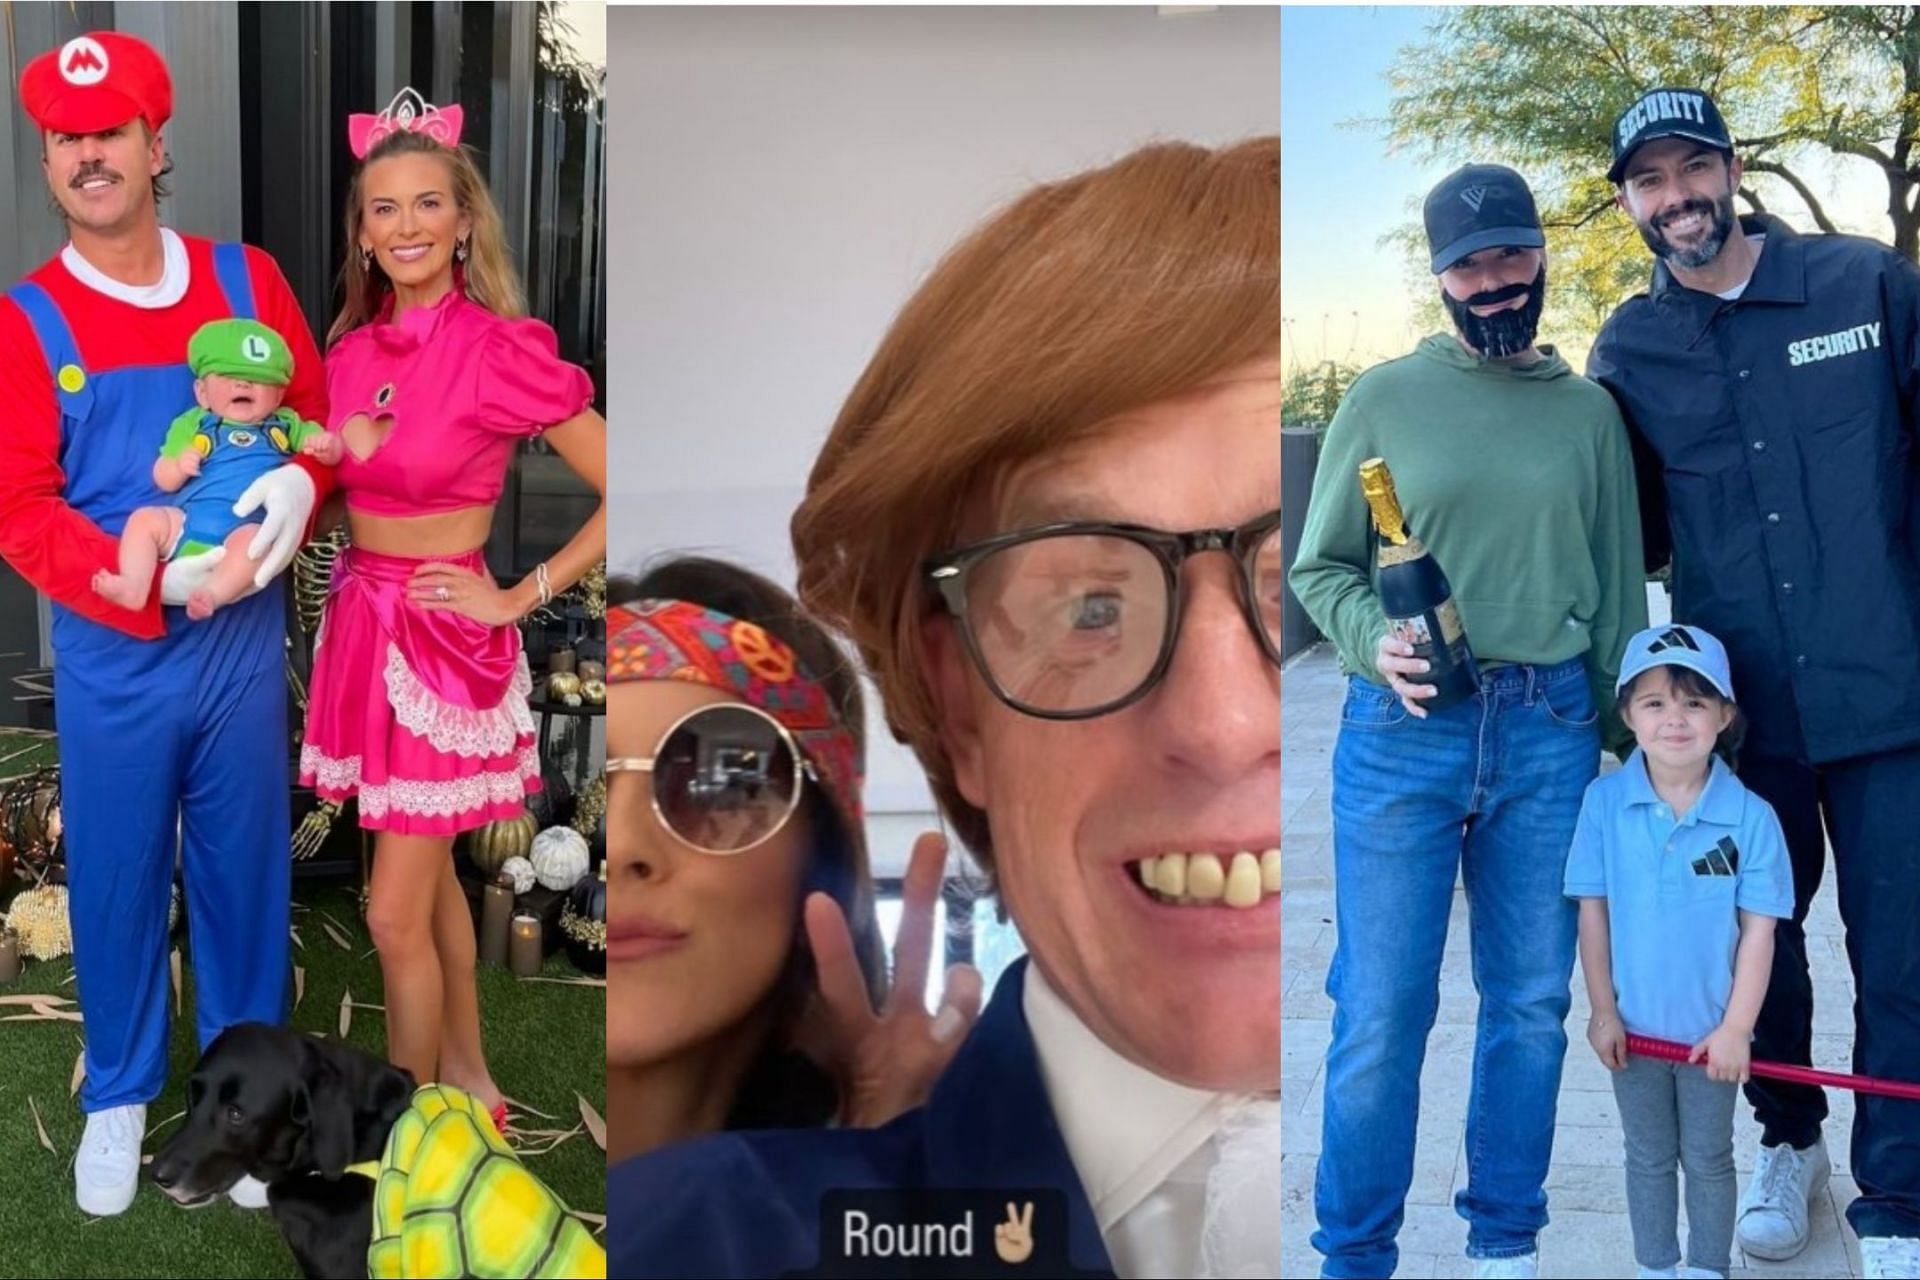 Golfers had fun sporting some interesting costumes on the Halloween